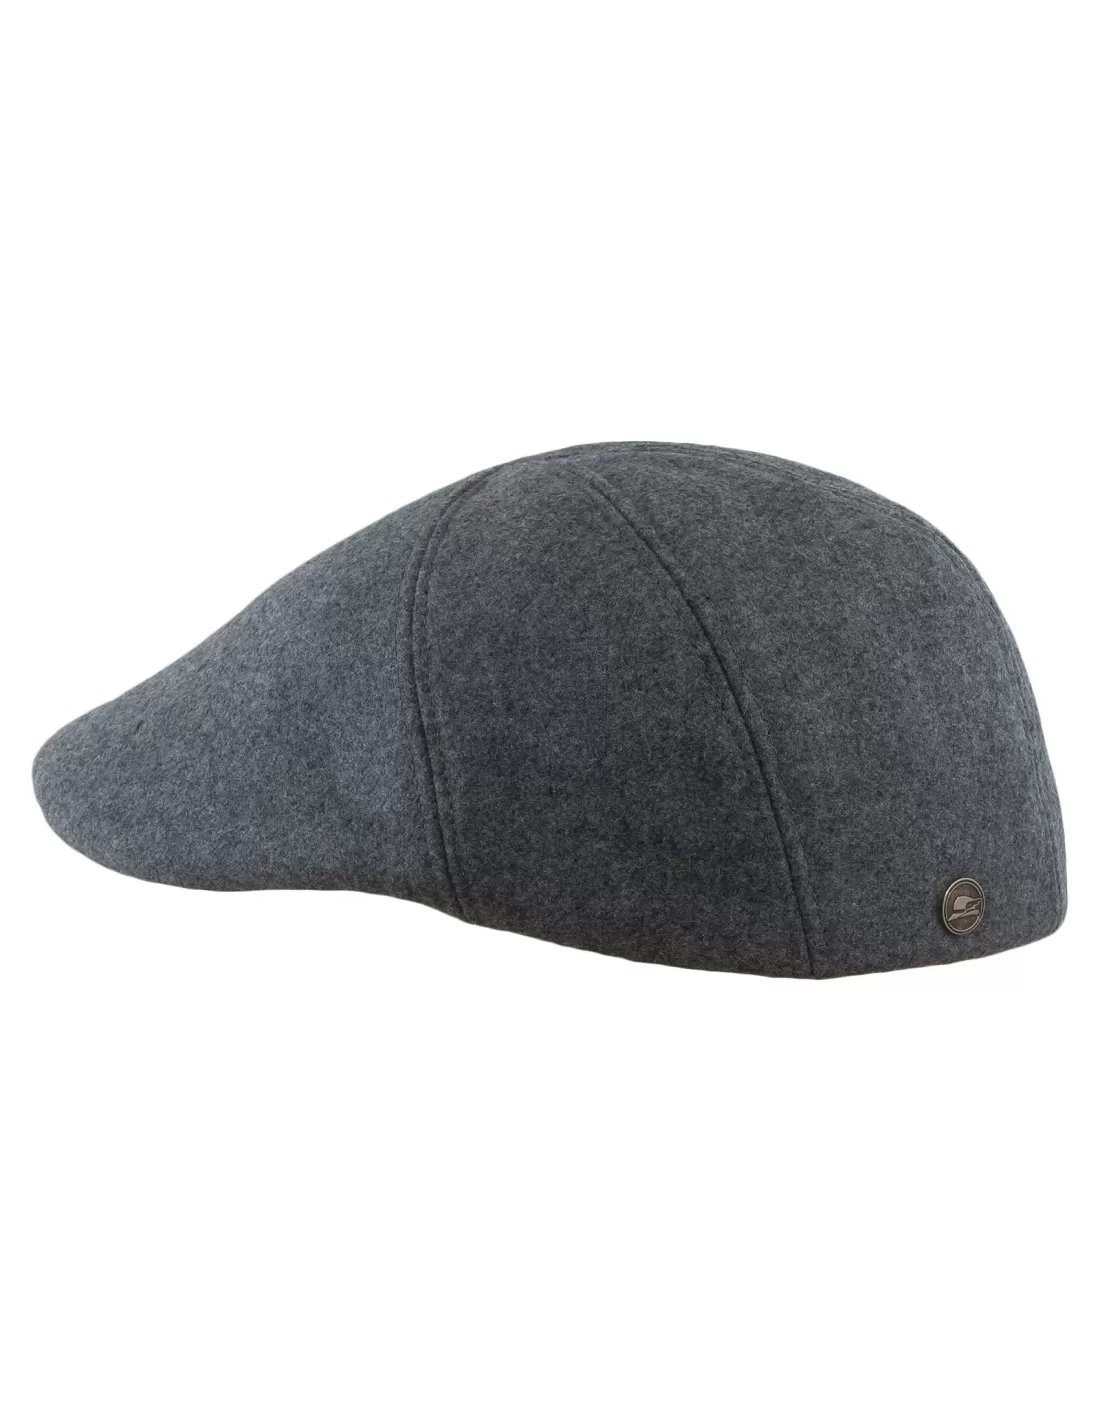 Ivy Five - winter / fall flat cap for man made of high quality wool ...